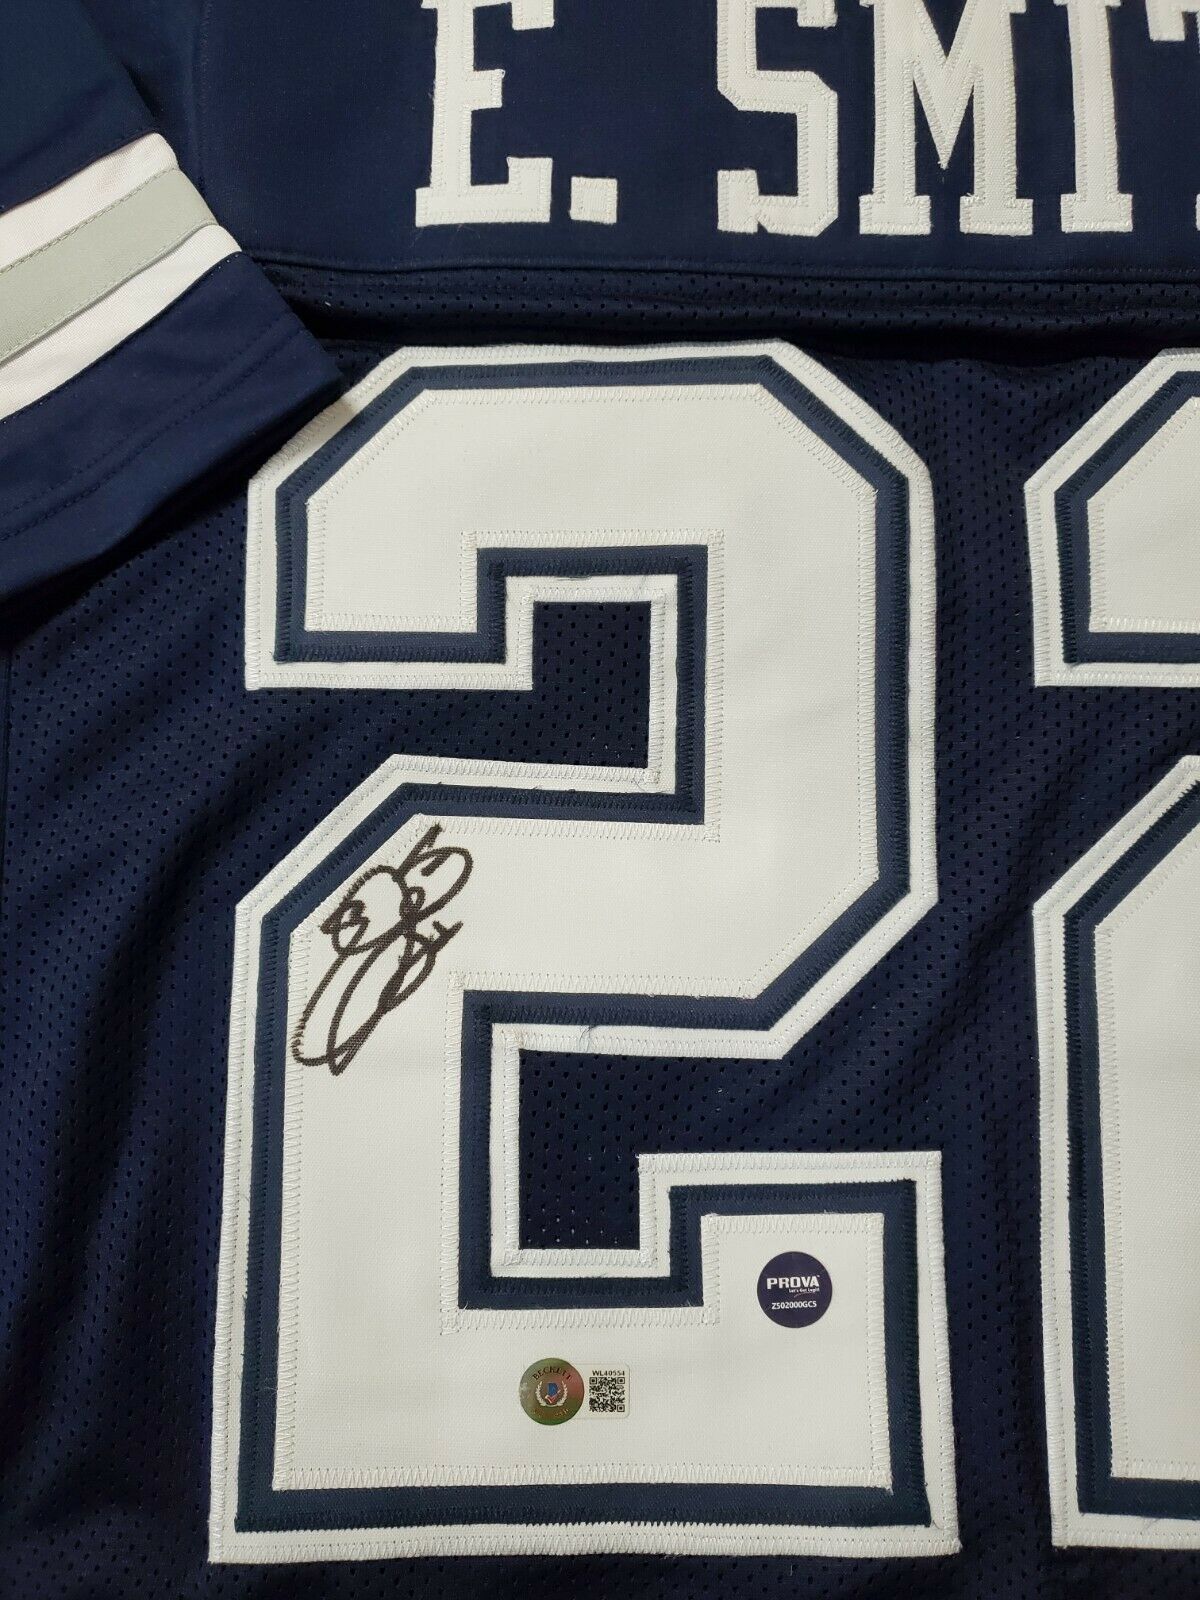 MVP Authentics DALLAS COWBOYS EMMITT SMITH AUTOGRAPHED SIGNED JERSEY BECKETT HOLO 251.10 sports jersey framing , jersey framing